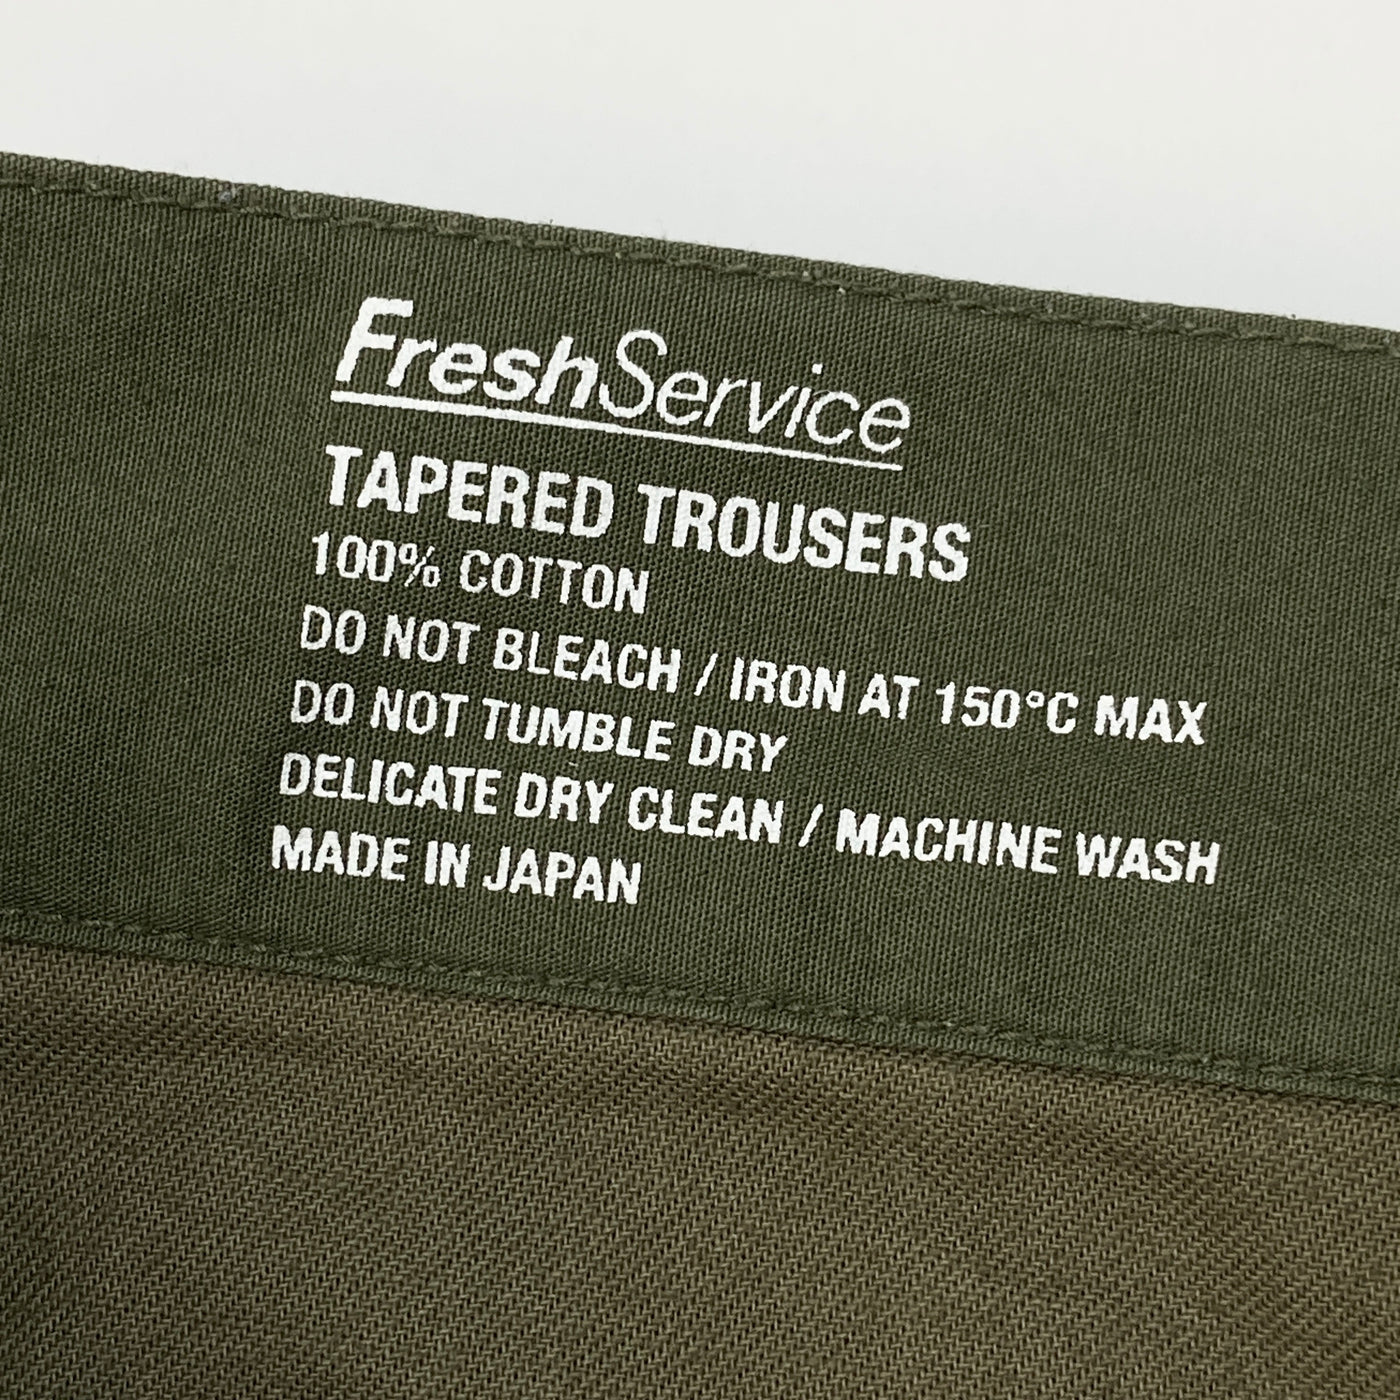 Freshservice TAPERED TROUSERS サイズL